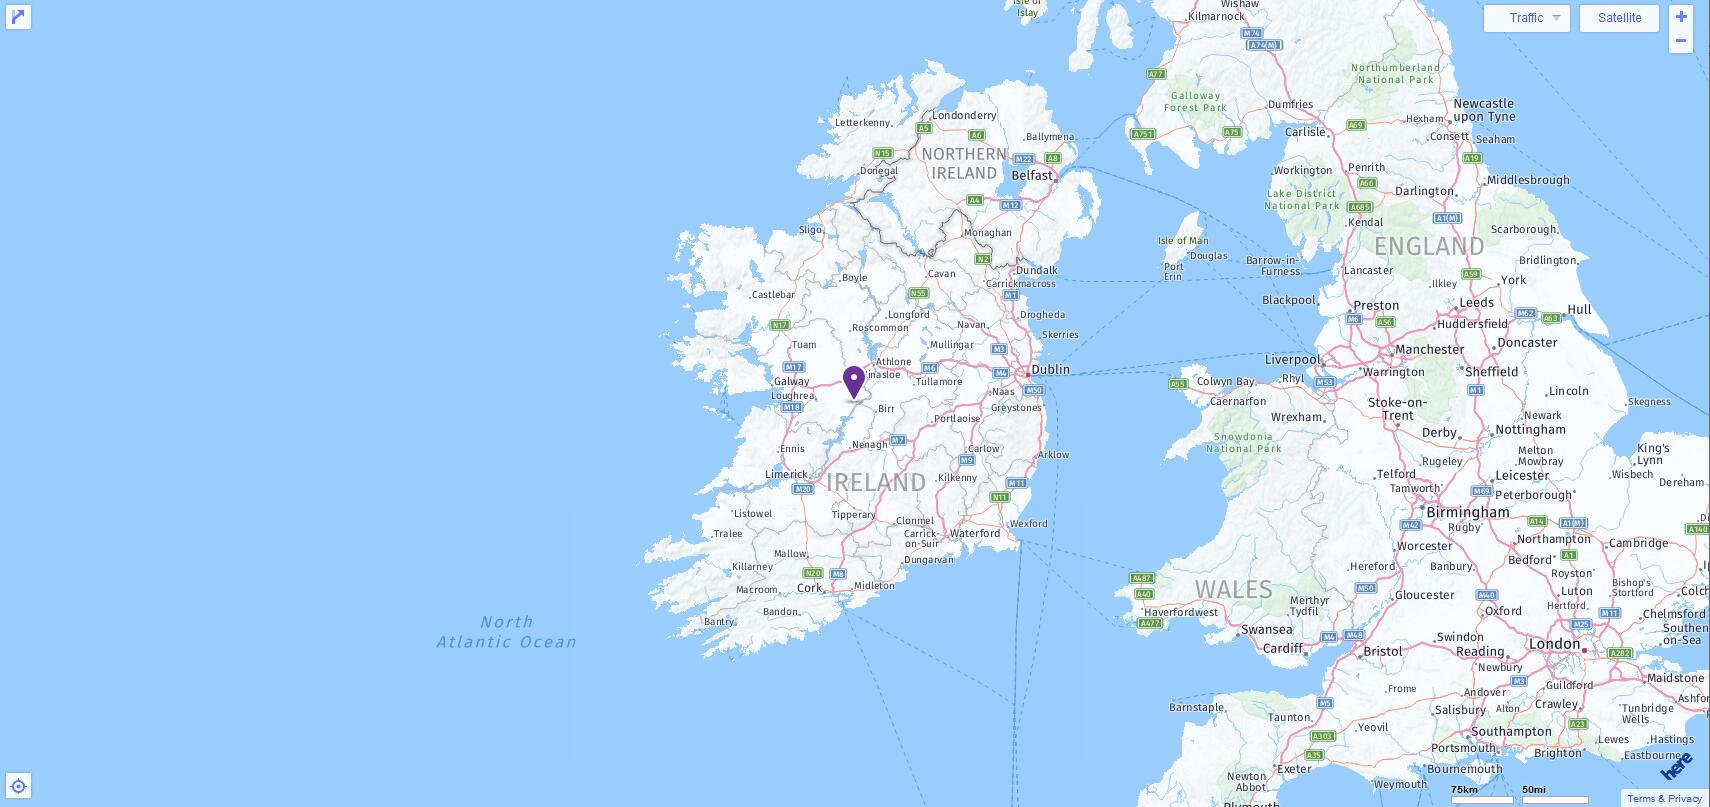 ACT Test Centers and Dates in Ireland